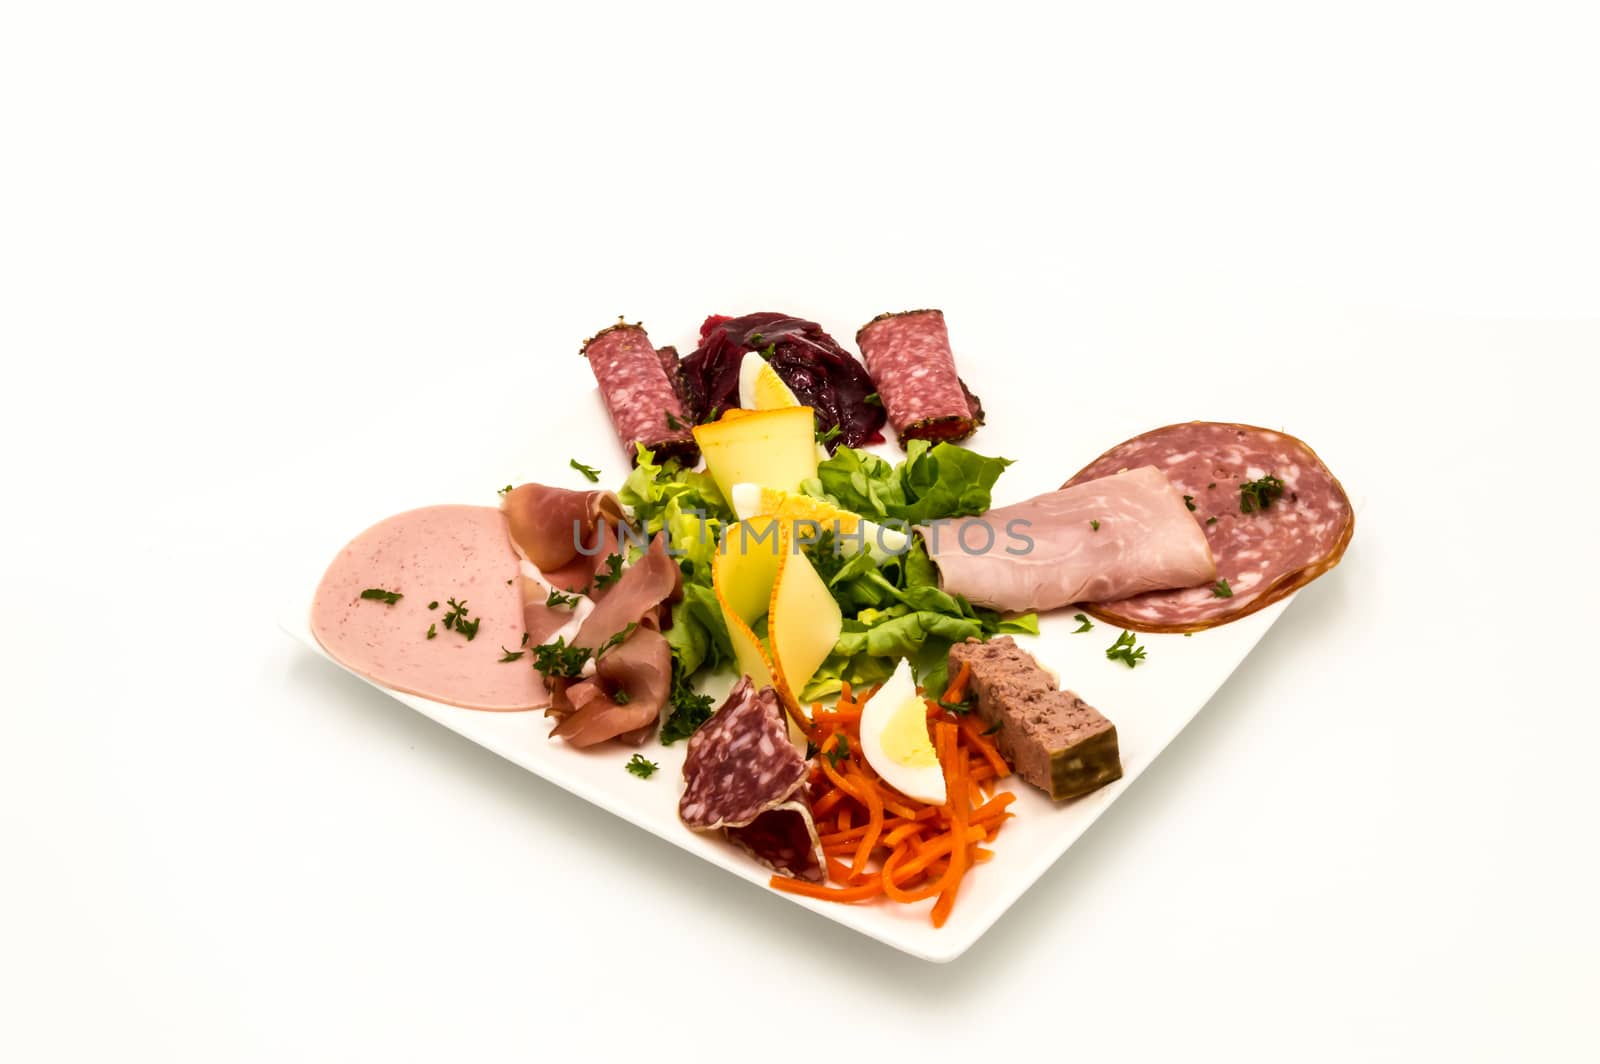 Plate of cold cuts and cheese with raw vegetables on a square plate on a white background